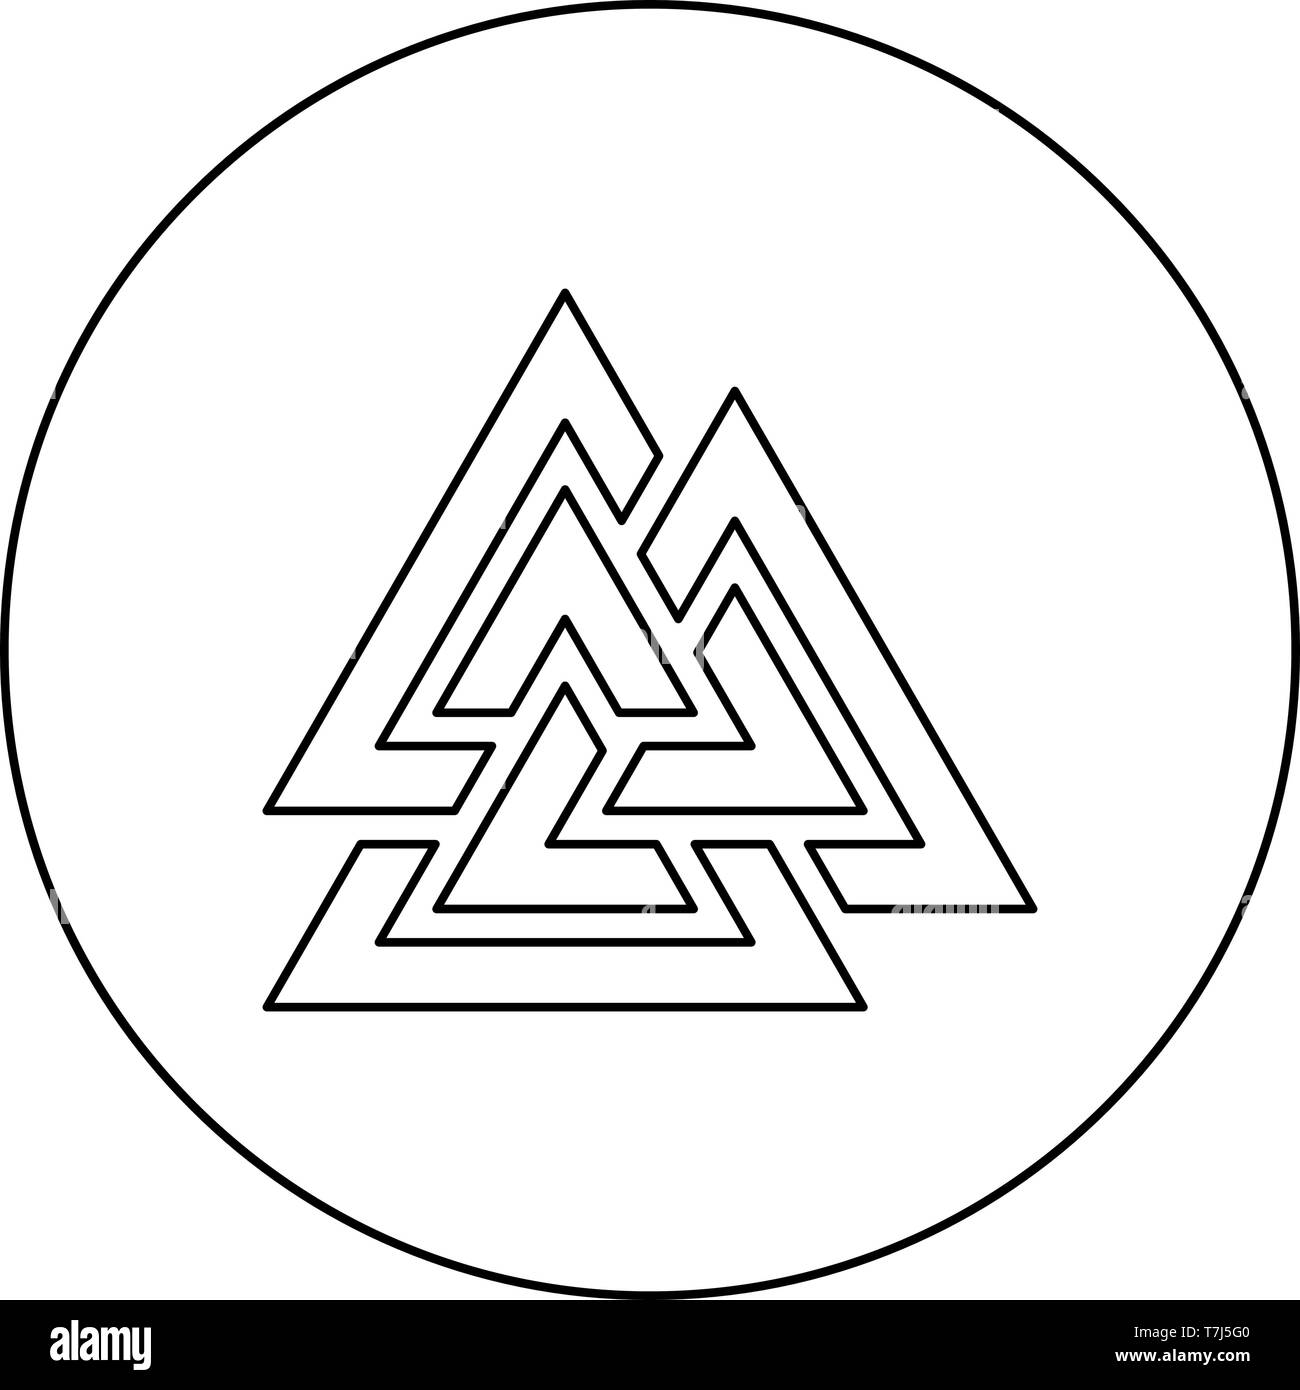 Valknut symbol icon in circle round outline black color vector illustration flat style simple image Stock Vector